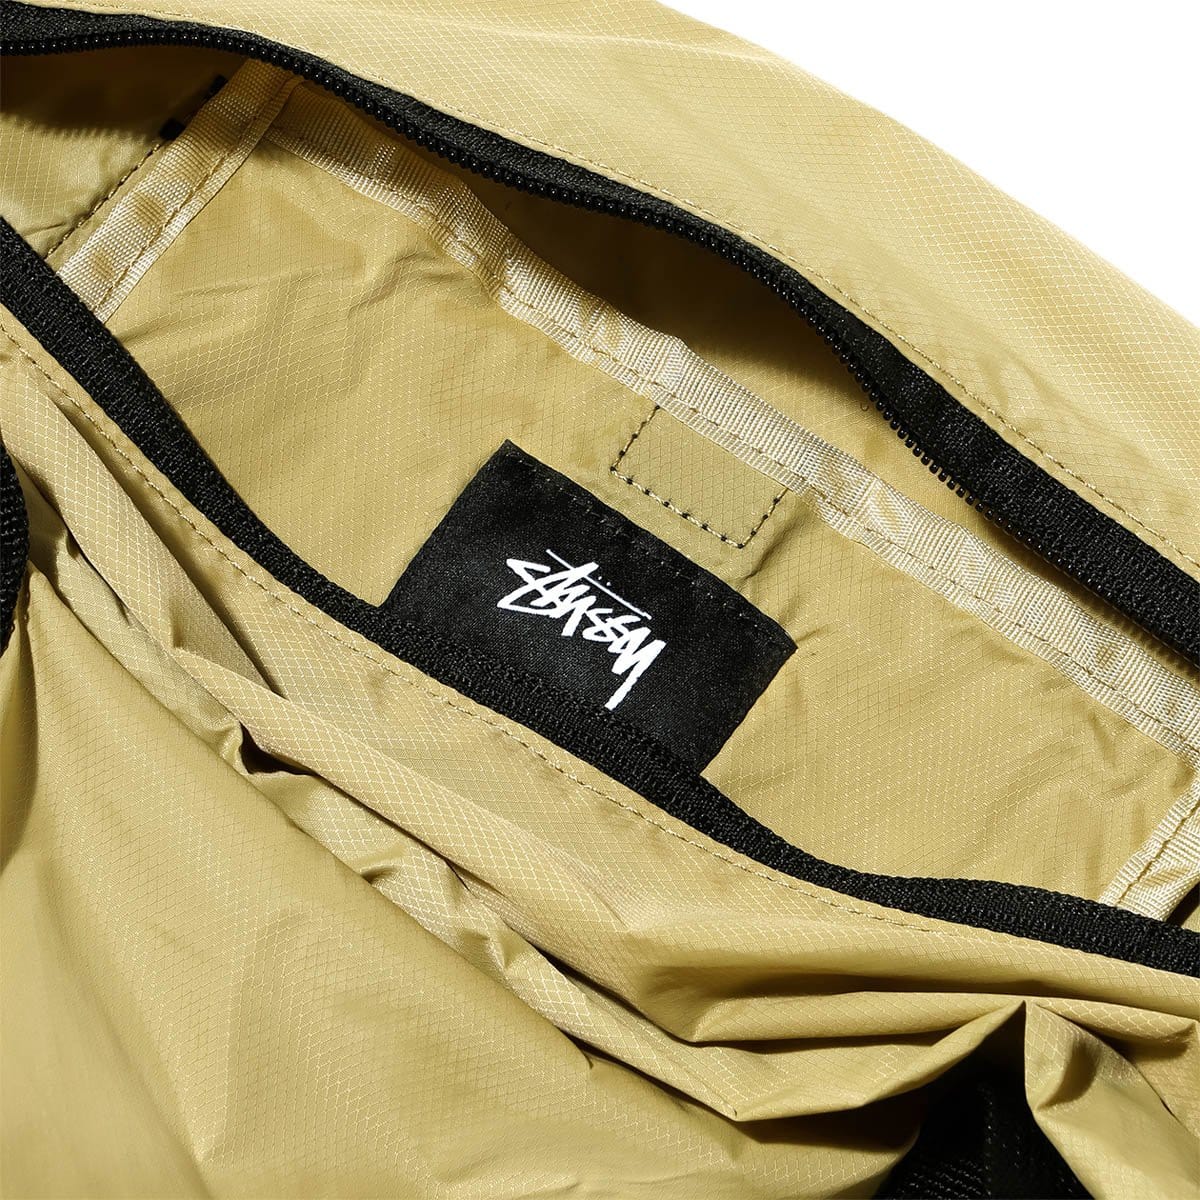 Stüssy Bags & Accessories GOLD / O/S LIGHT WEIGHT TRAVEL TOTE BAG